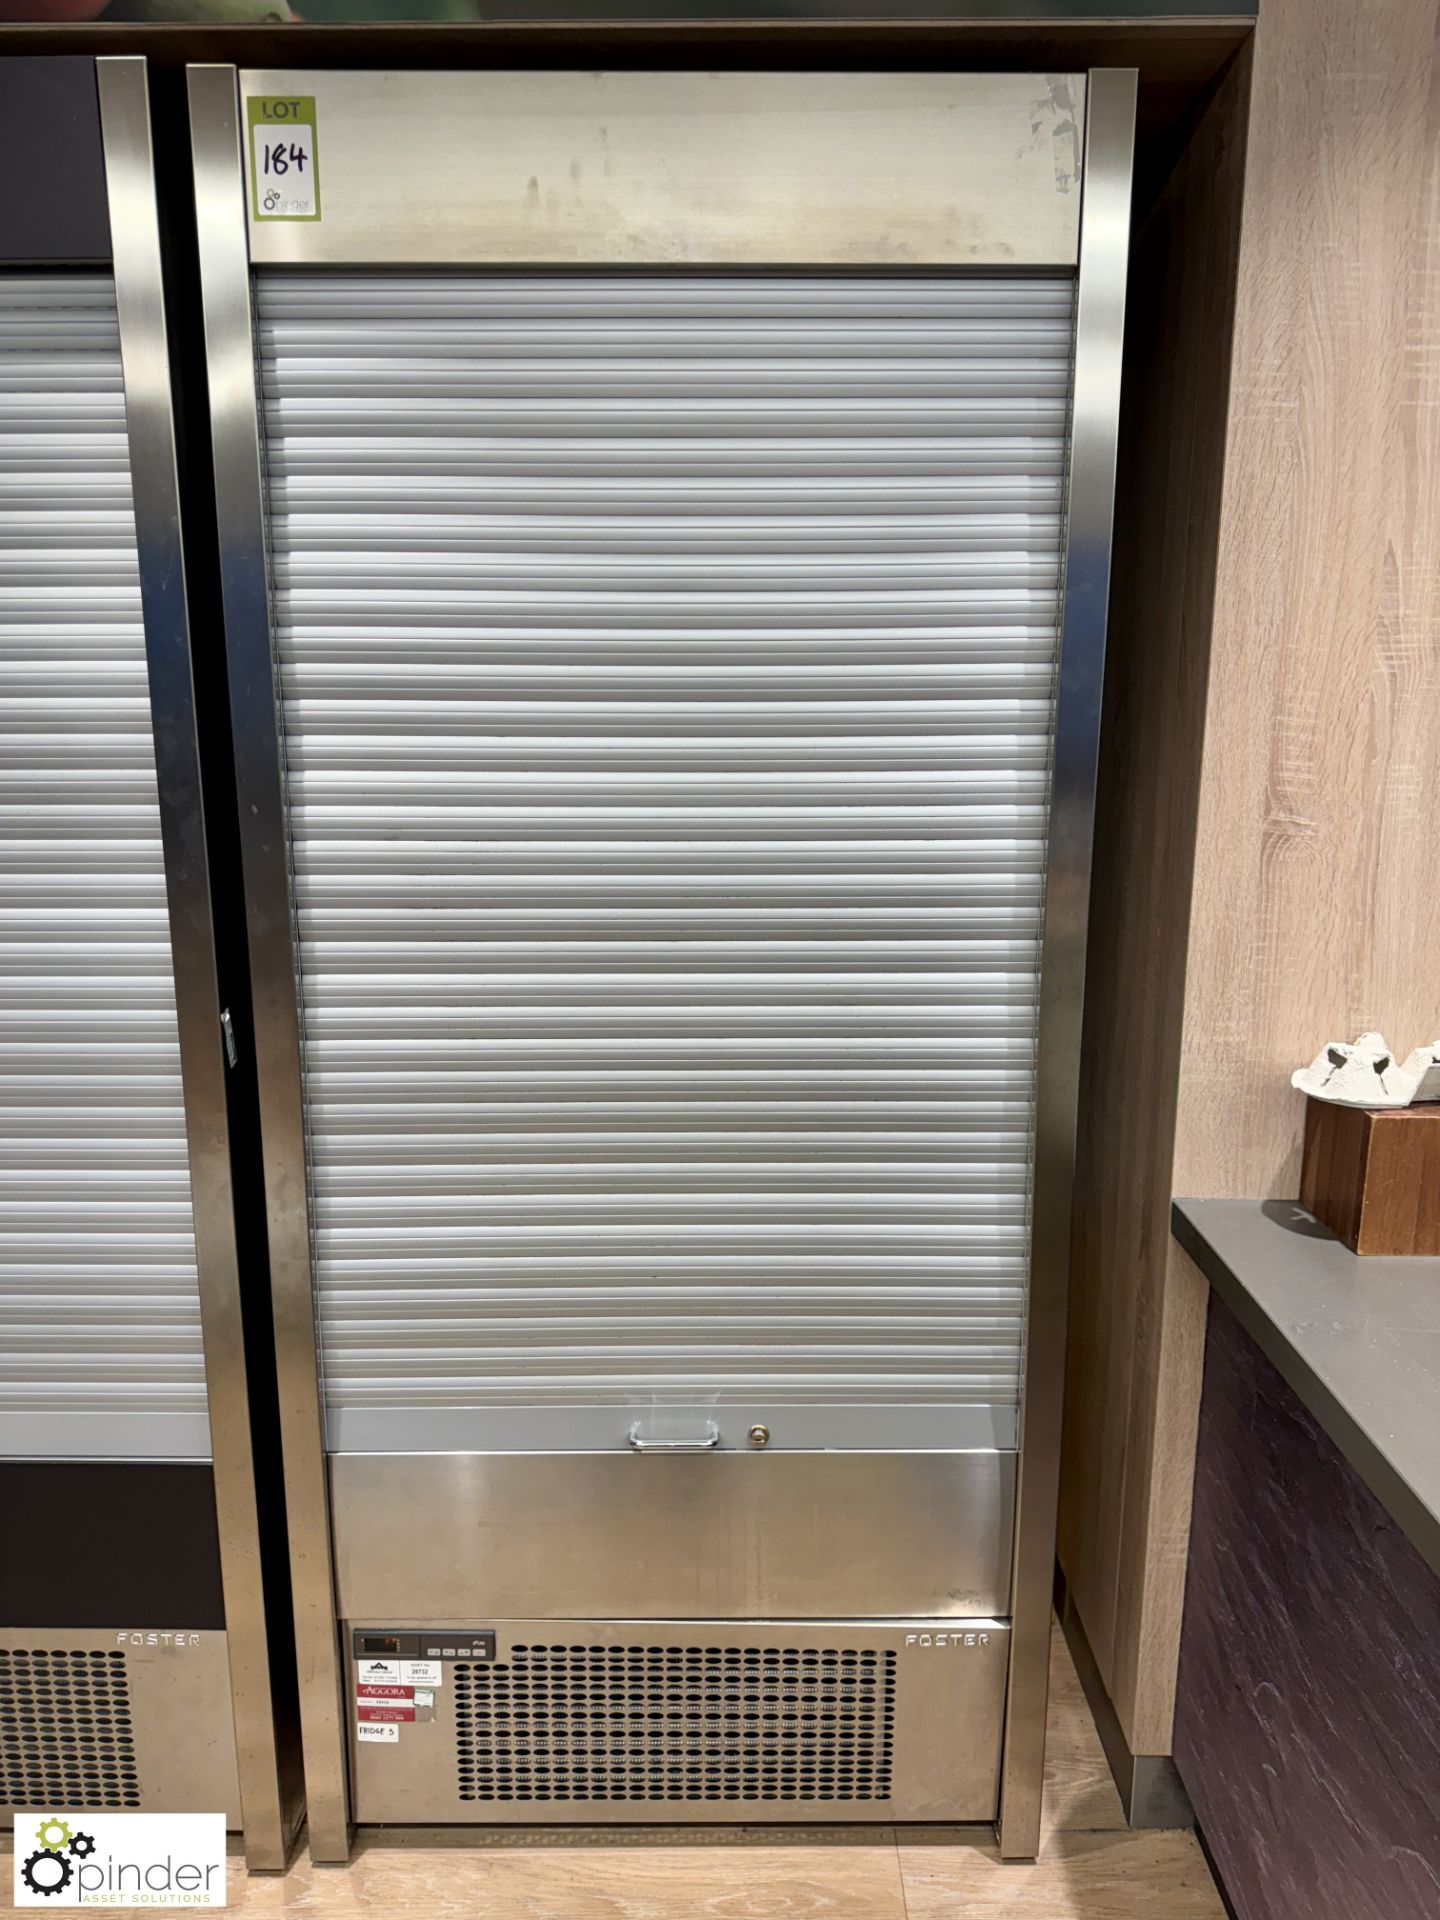 Foster stainless steel shutter front Chilled Display Unit, 240volts, 1200mm x 780mm x 2000mm ( - Image 2 of 3